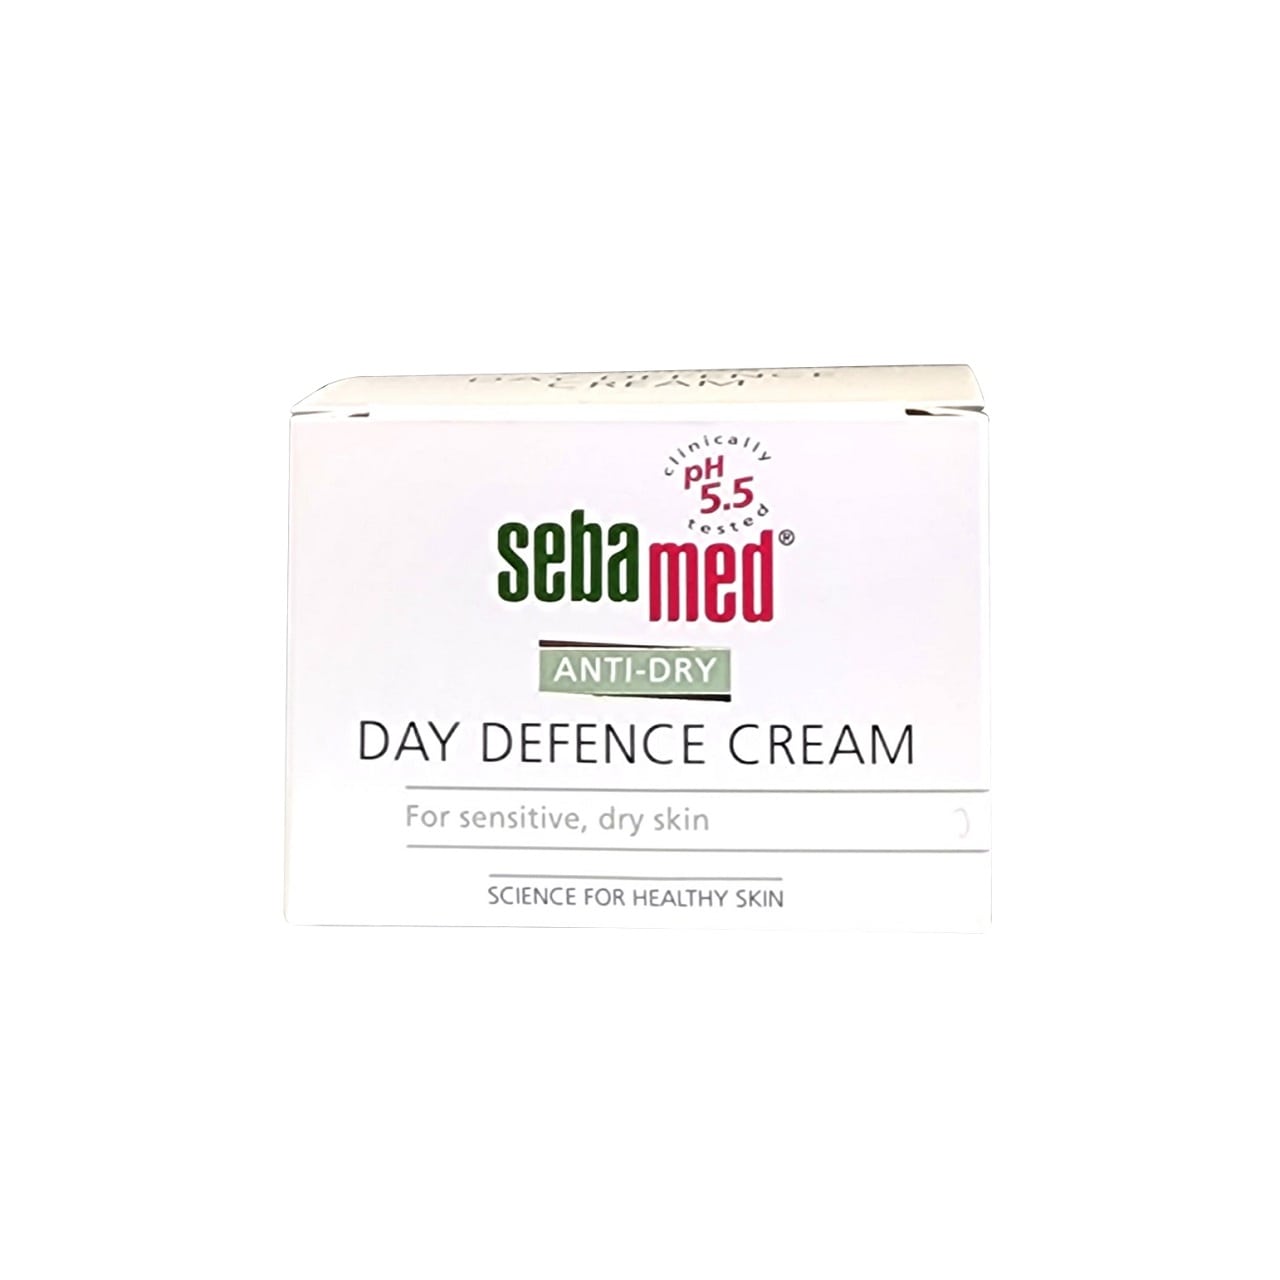 Product label for Sebamed Anti-Dry Day Defence Cream (50 mL) in English